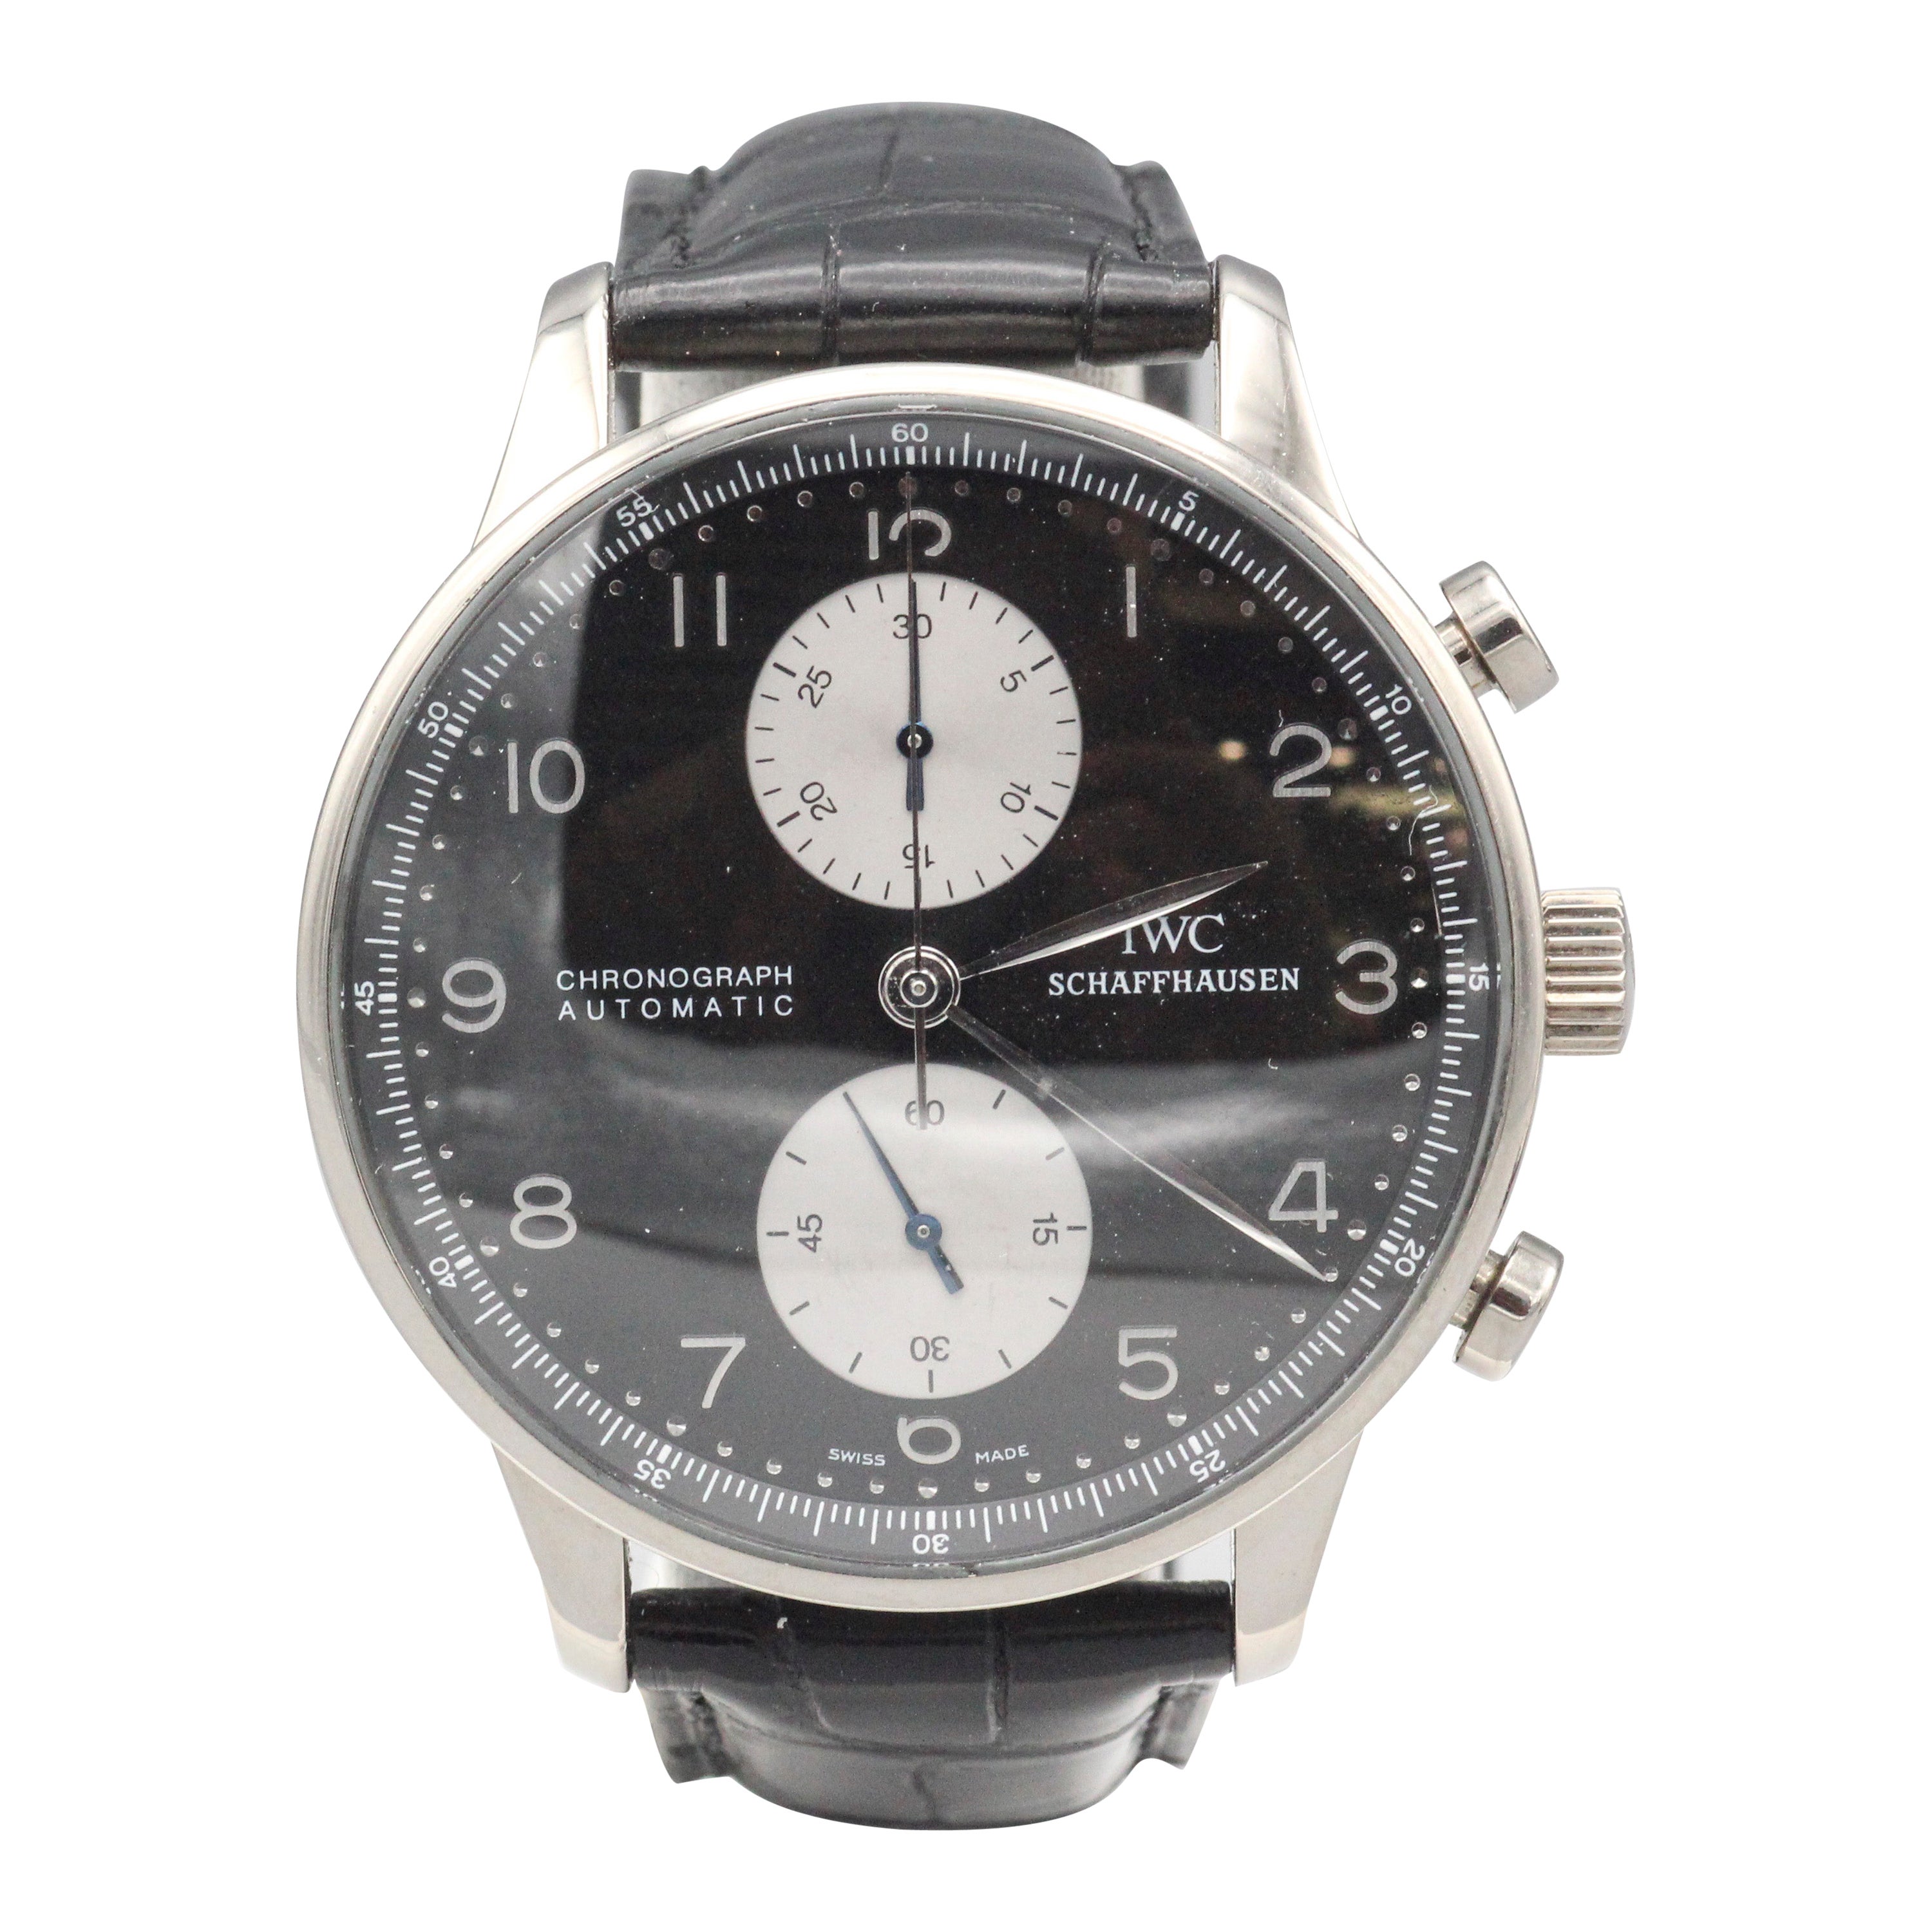 IWC Portugieser 18k White Gold Chronograph Wristwatch with rare Panda Dial For Sale